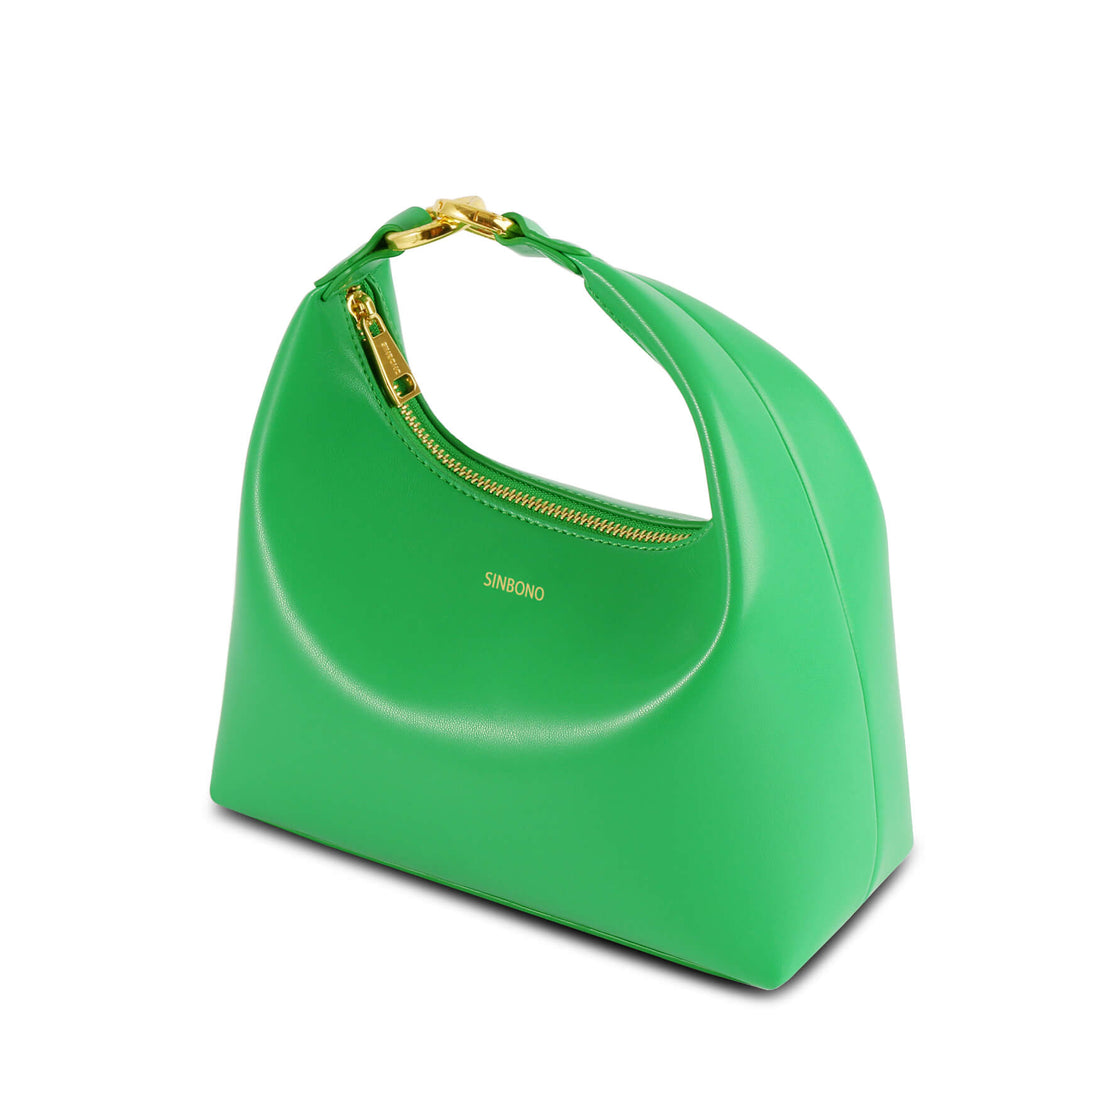 SINBONO Grass Green Shoulder Bags-Crafted from Faux Leather Bag